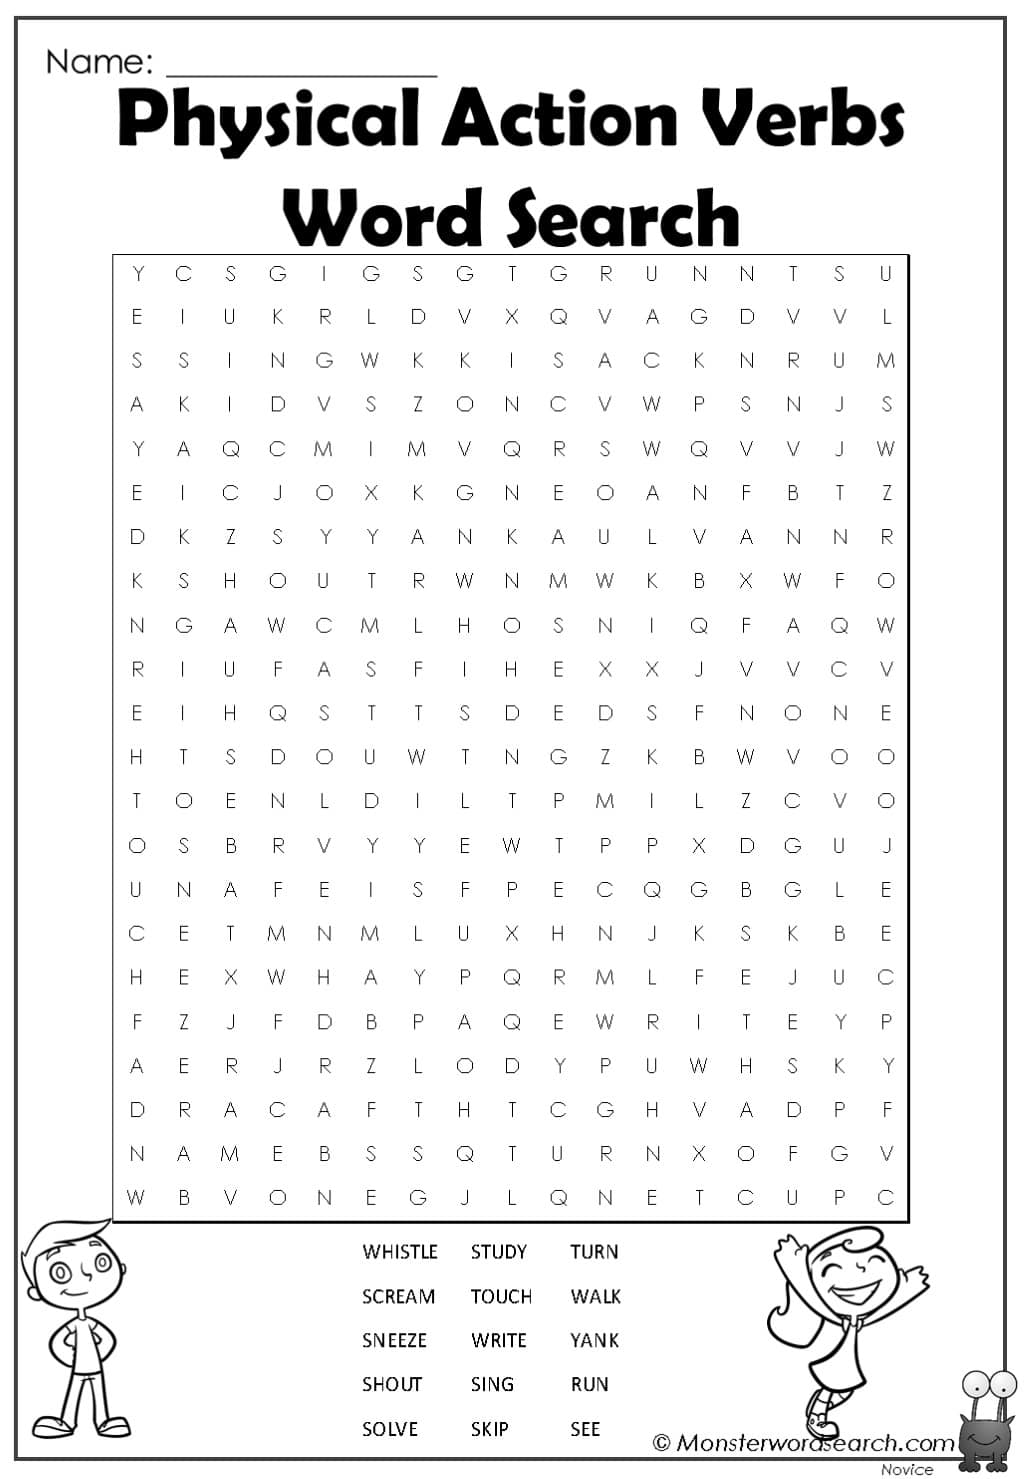 physical-action-verbs-word-search-1-jpg-monster-word-search